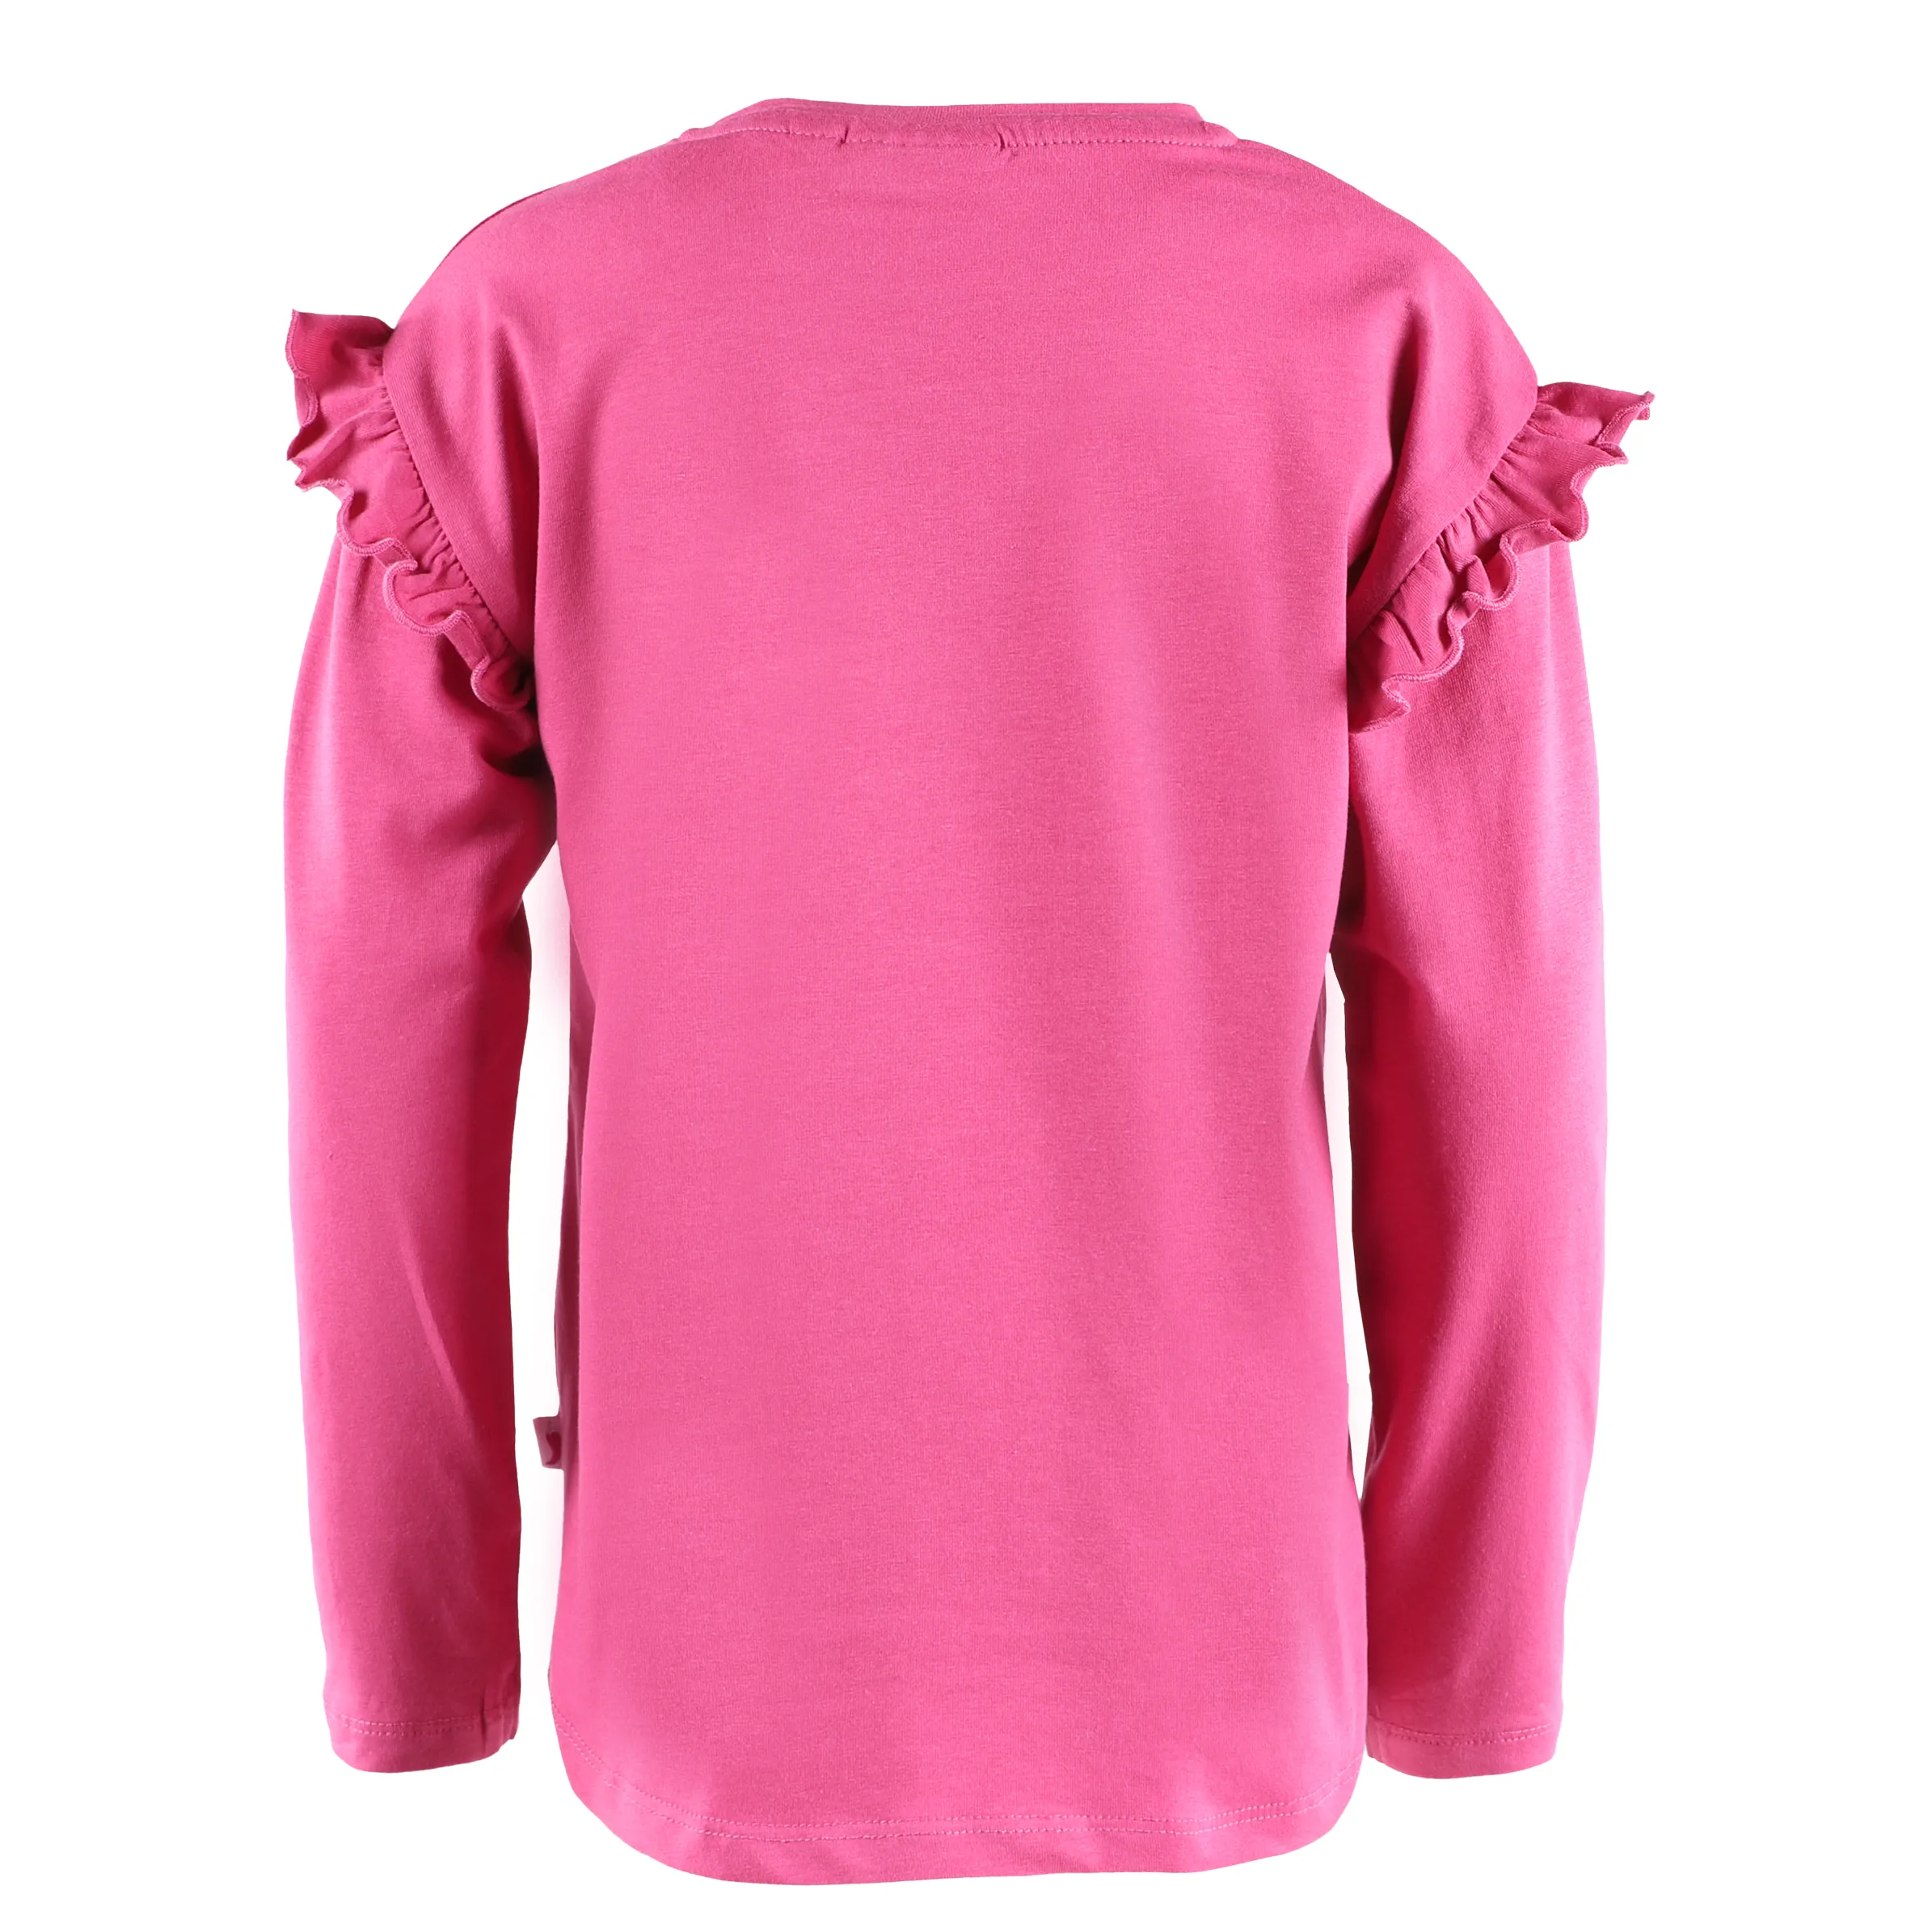 Stop + Go KM Longsleeve Shirt in pink Stay Wild Pink 881561 PINK 2